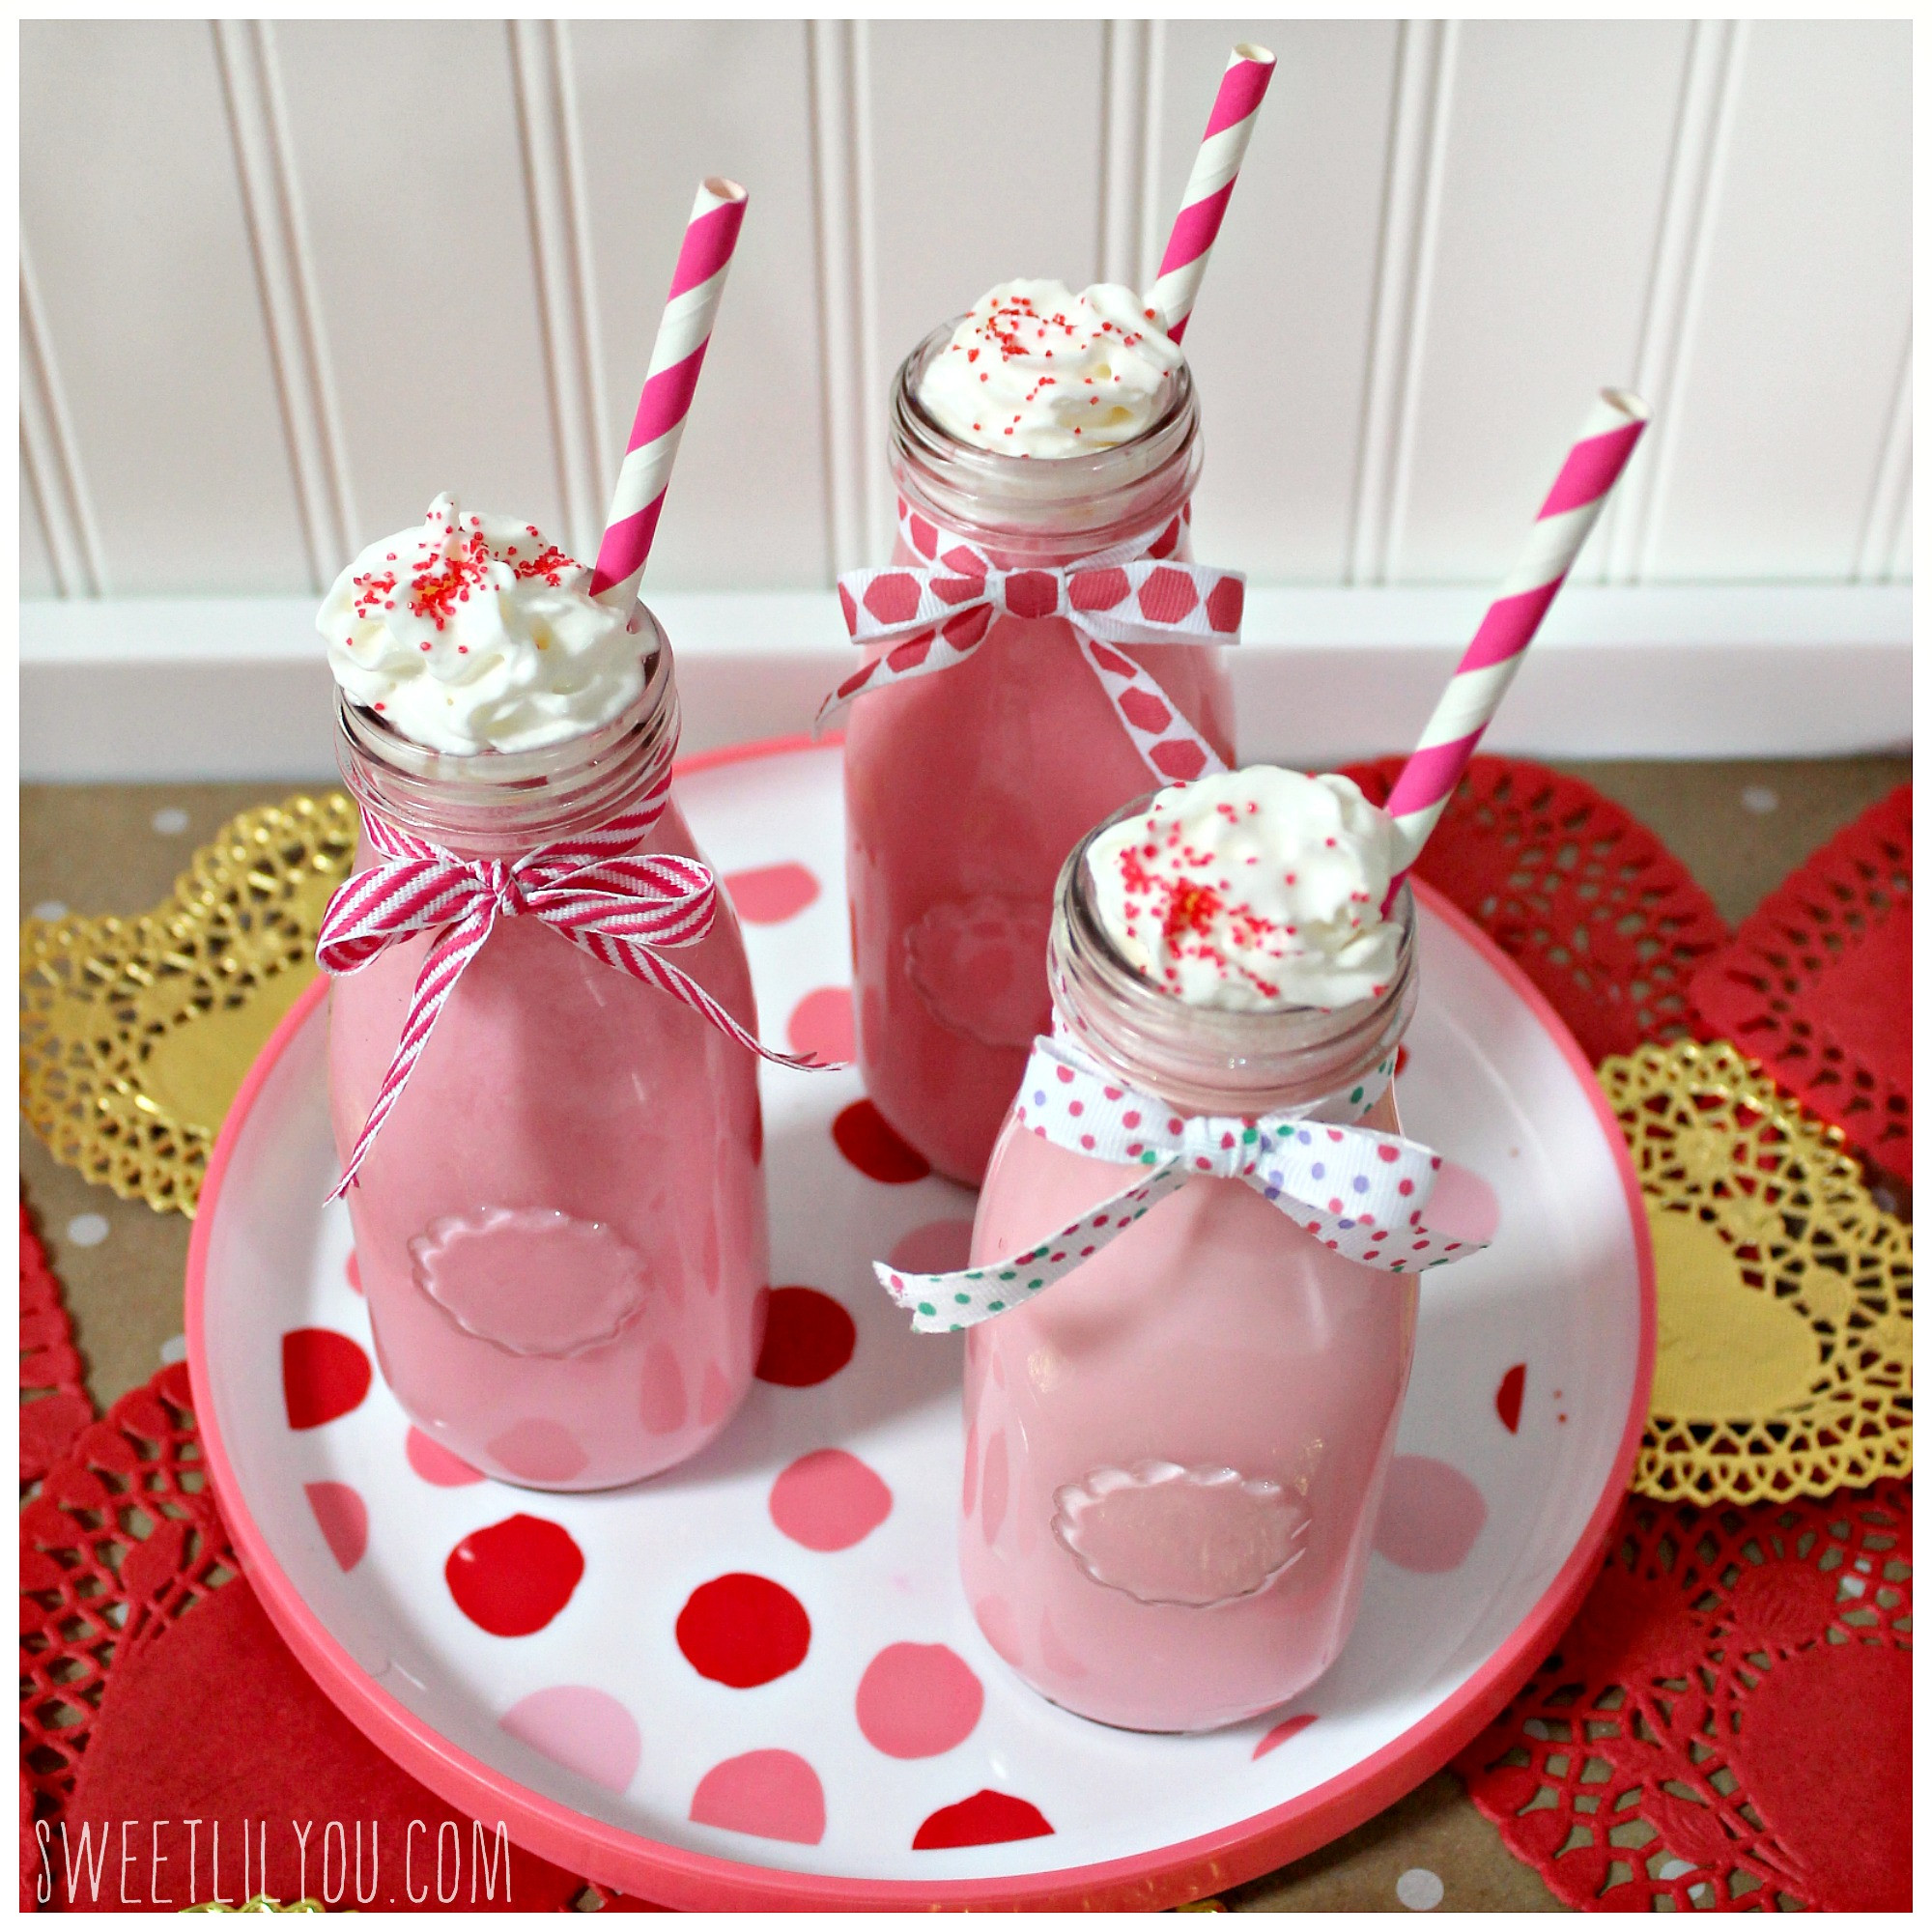 Valentine'S Day Food Ideas For A Party
 Raspberry White Hot Chocolate Valentine s Day Recipe